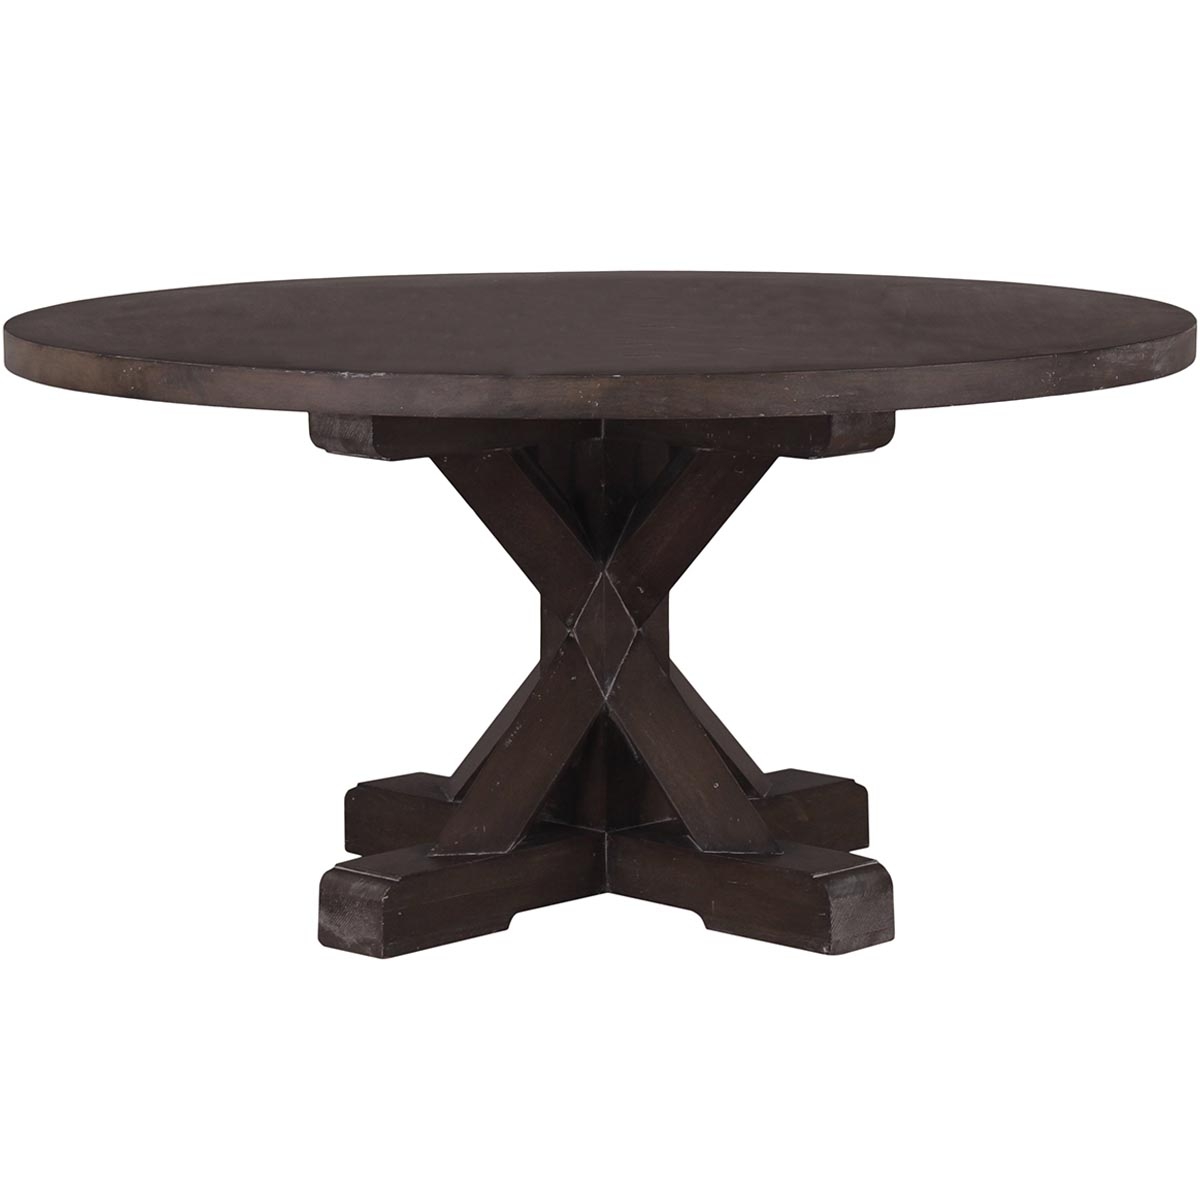 Bankside Trestle Round Dining Table 5' w/ out Grooves